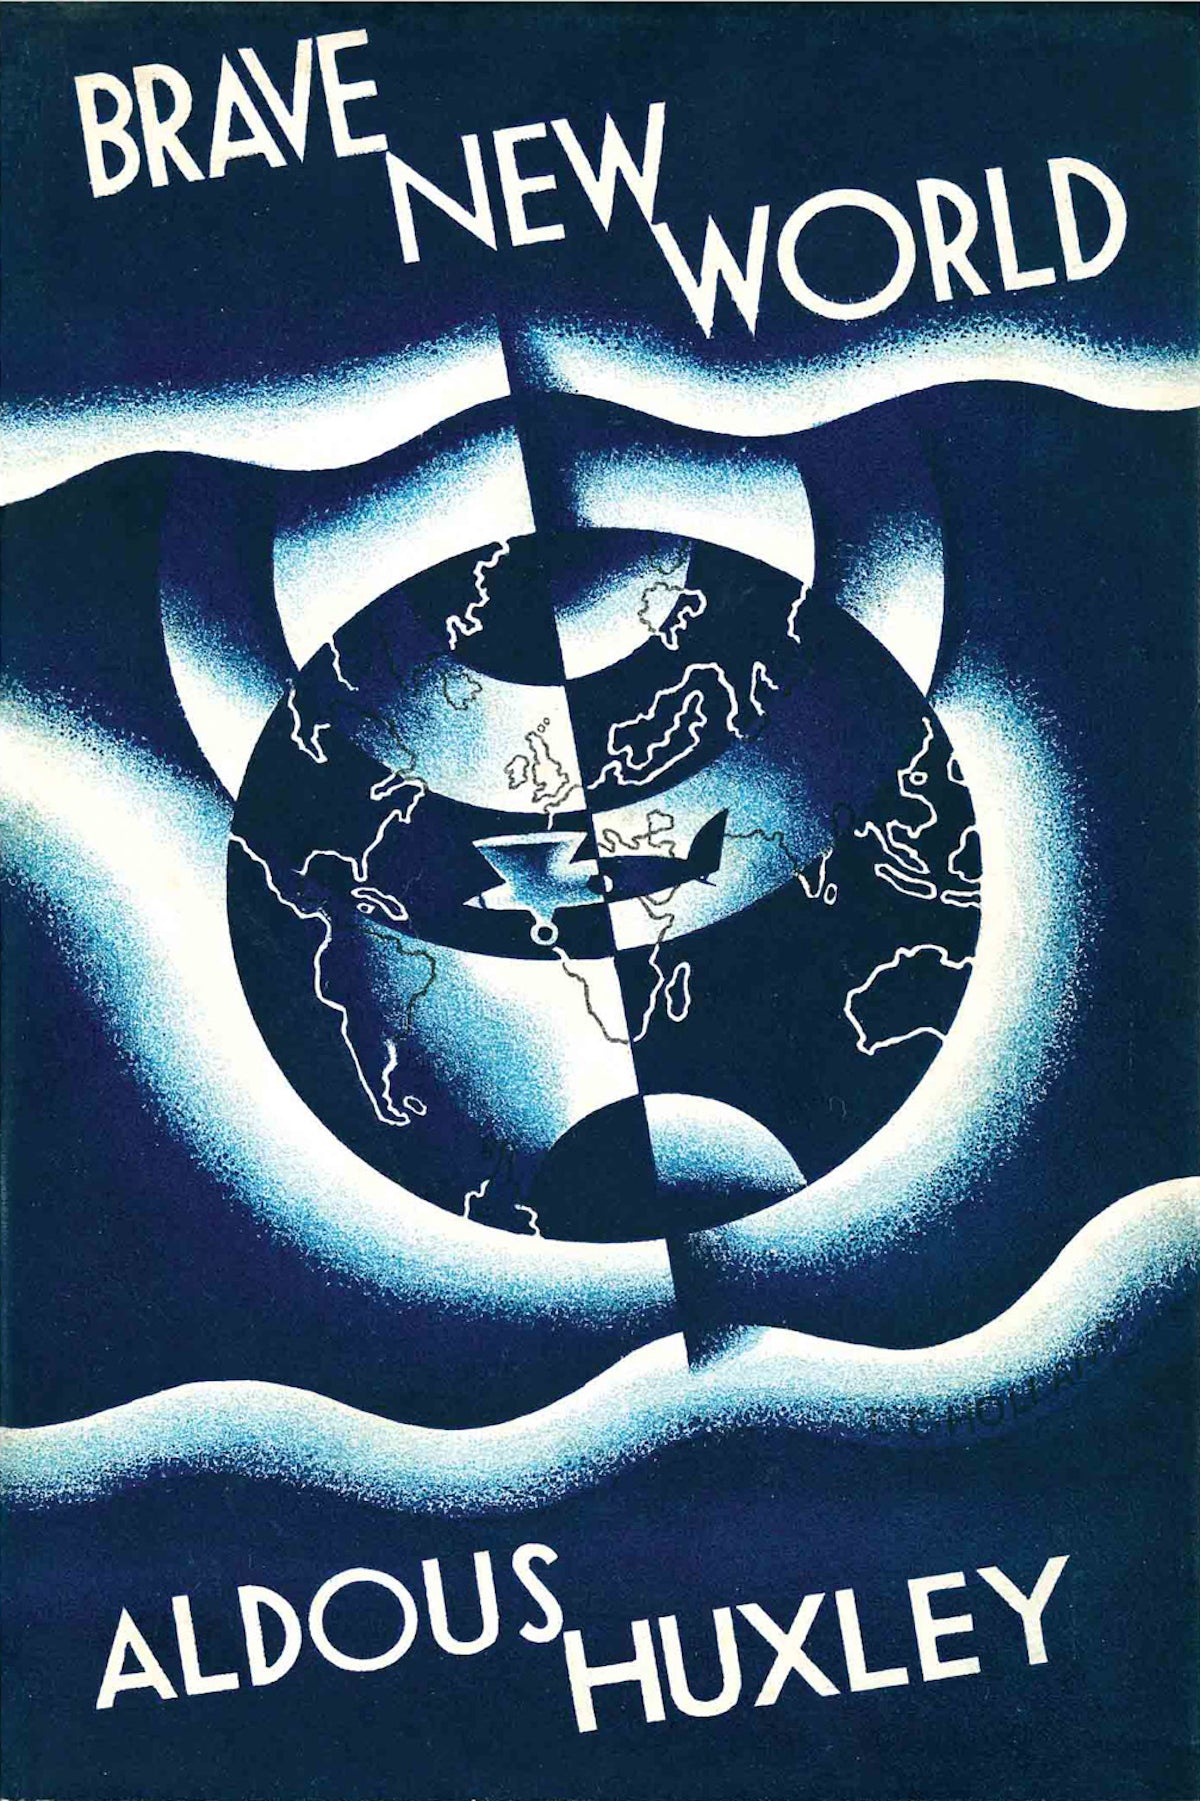 It’s Not 1932 Anymore, But Aldous Huxley’s Dystopian Brave New World Is Very Relevant